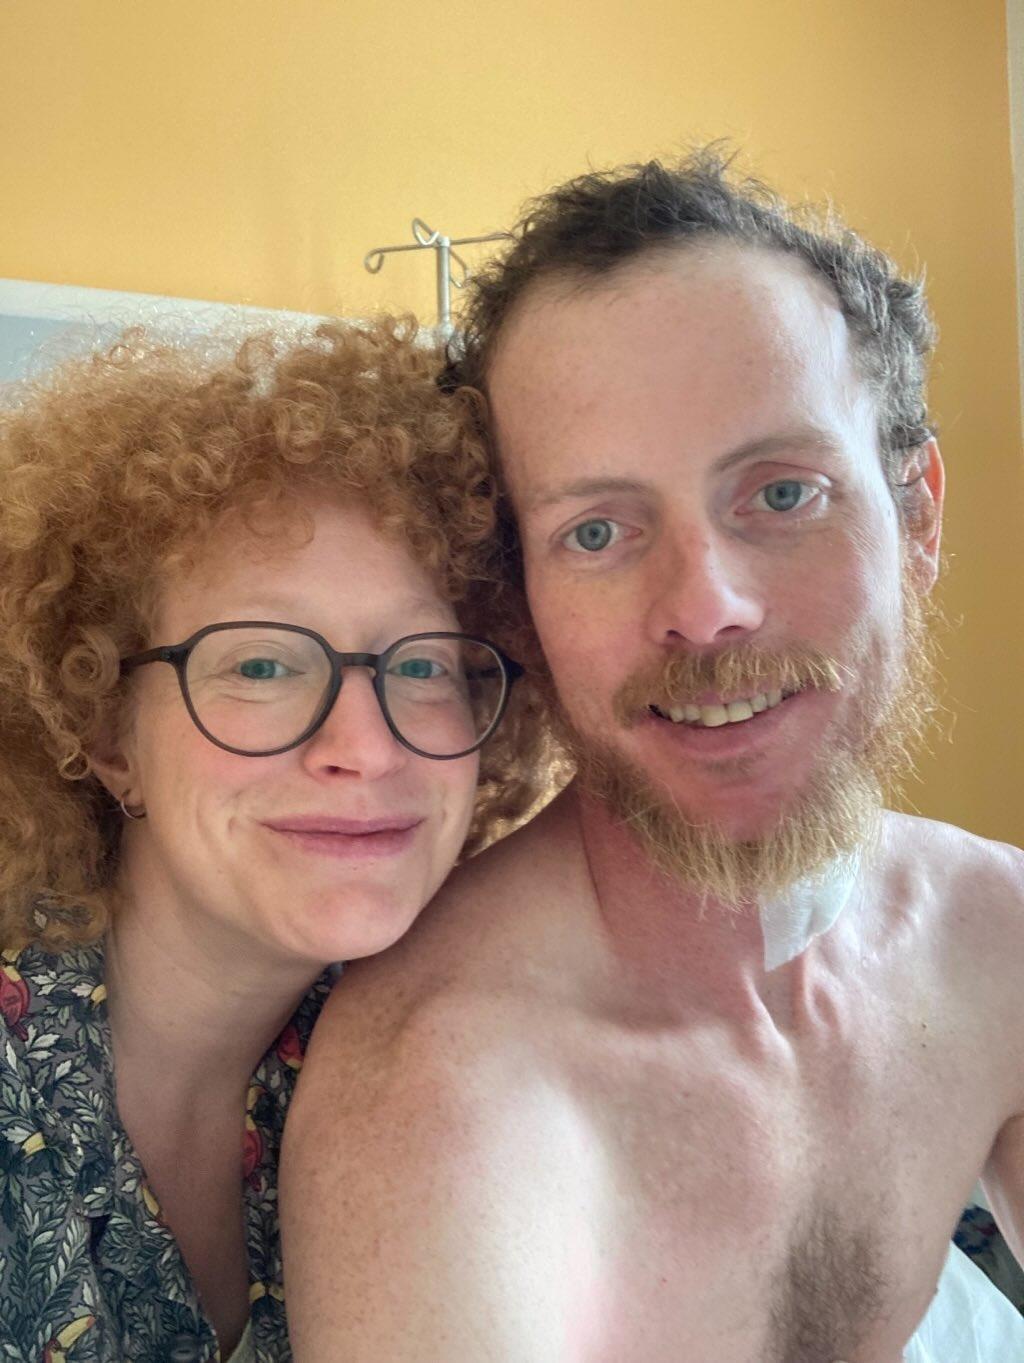 Canadian couple gets hookworms on vacation, has to go to US for medicine